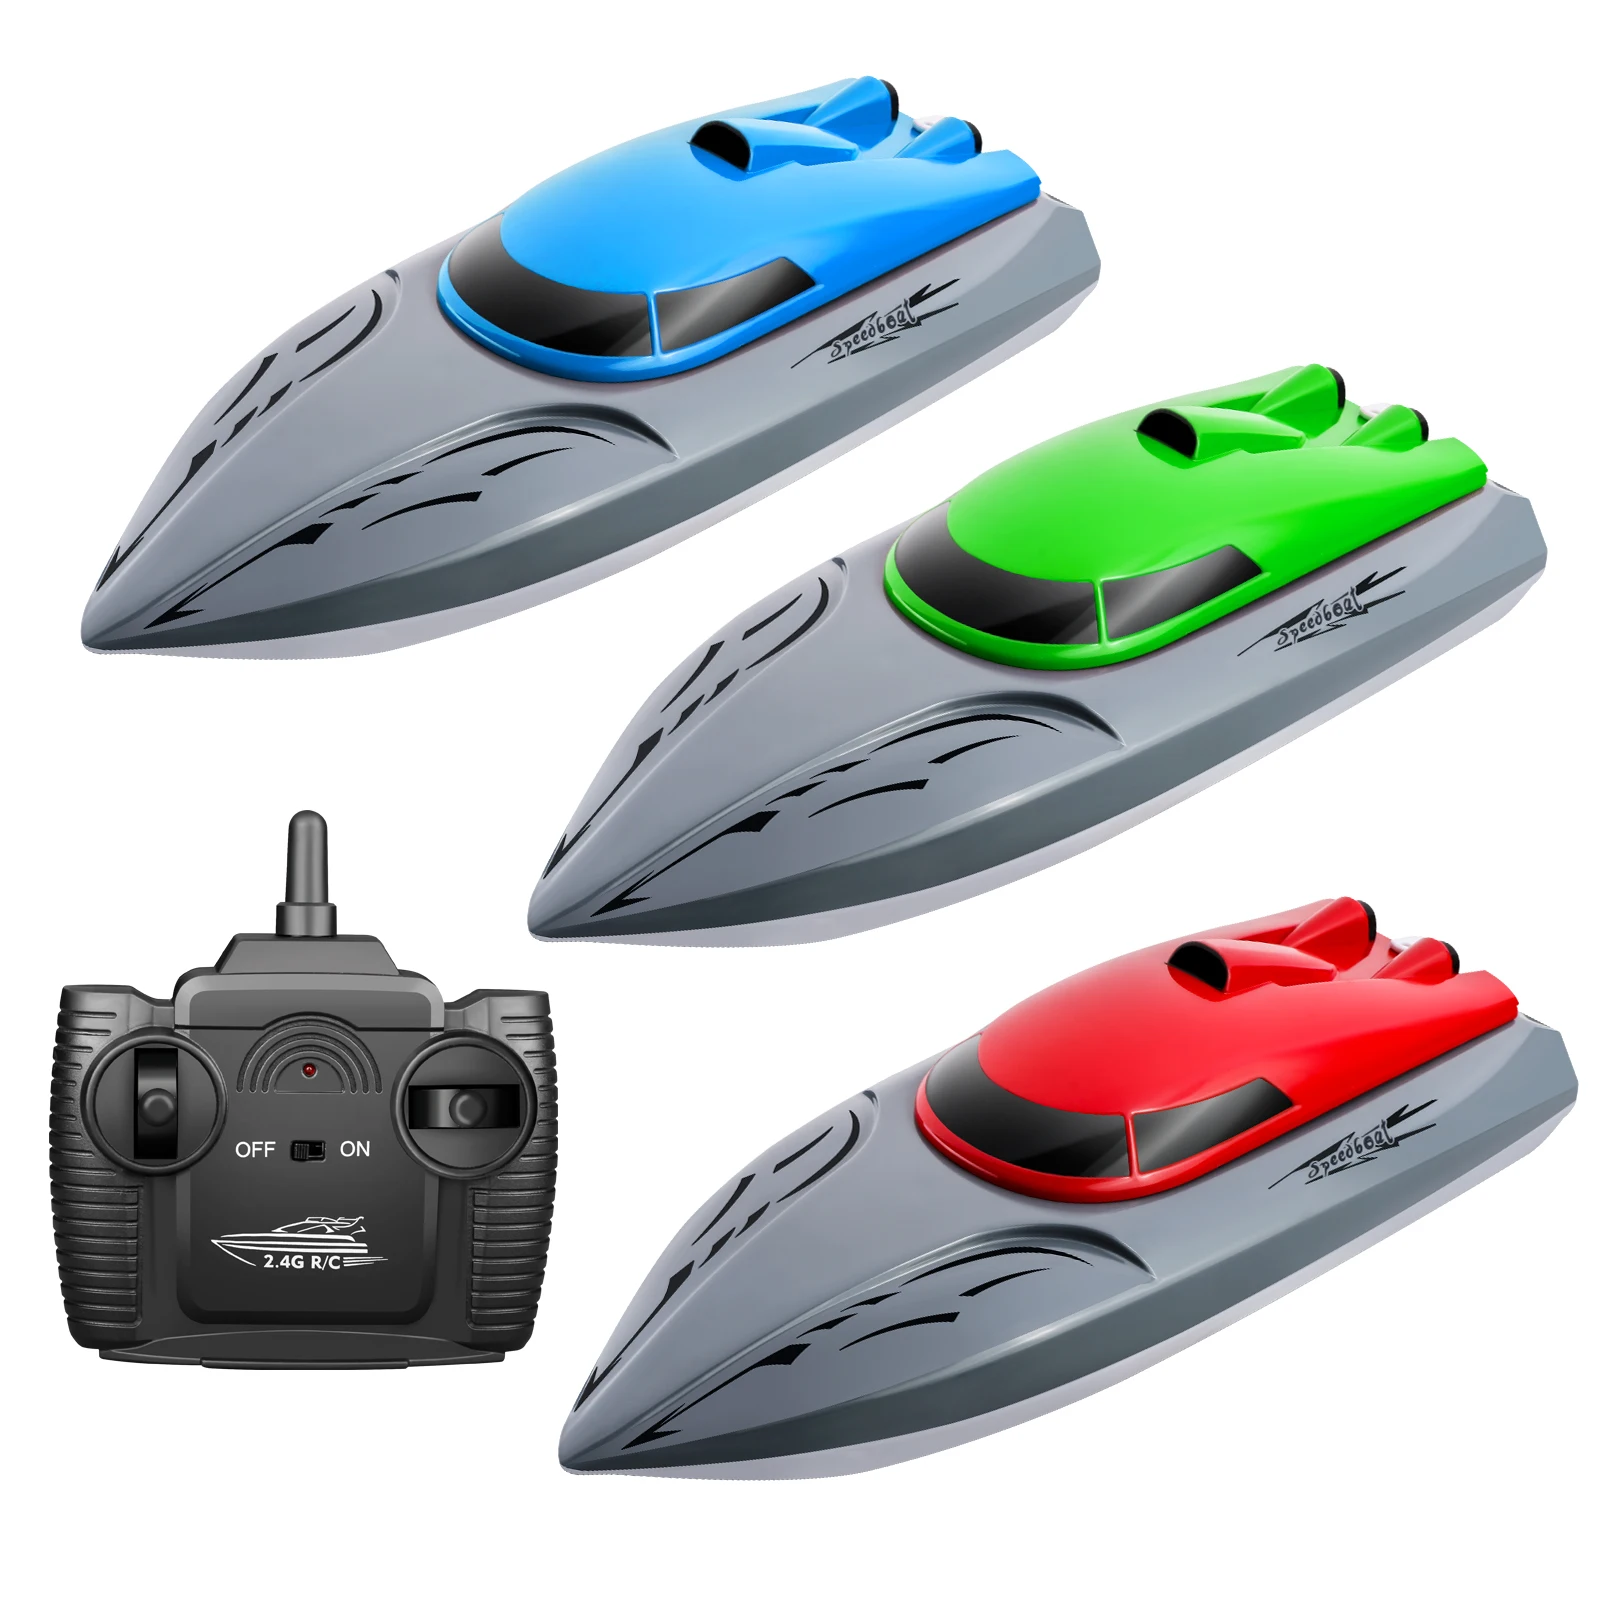 

806 2.4G RC Boat Radio-controlled boat PVC Fishing Boats Toy For Dual motor 20KM/h High Speed RC Racing boat Gift for Kids